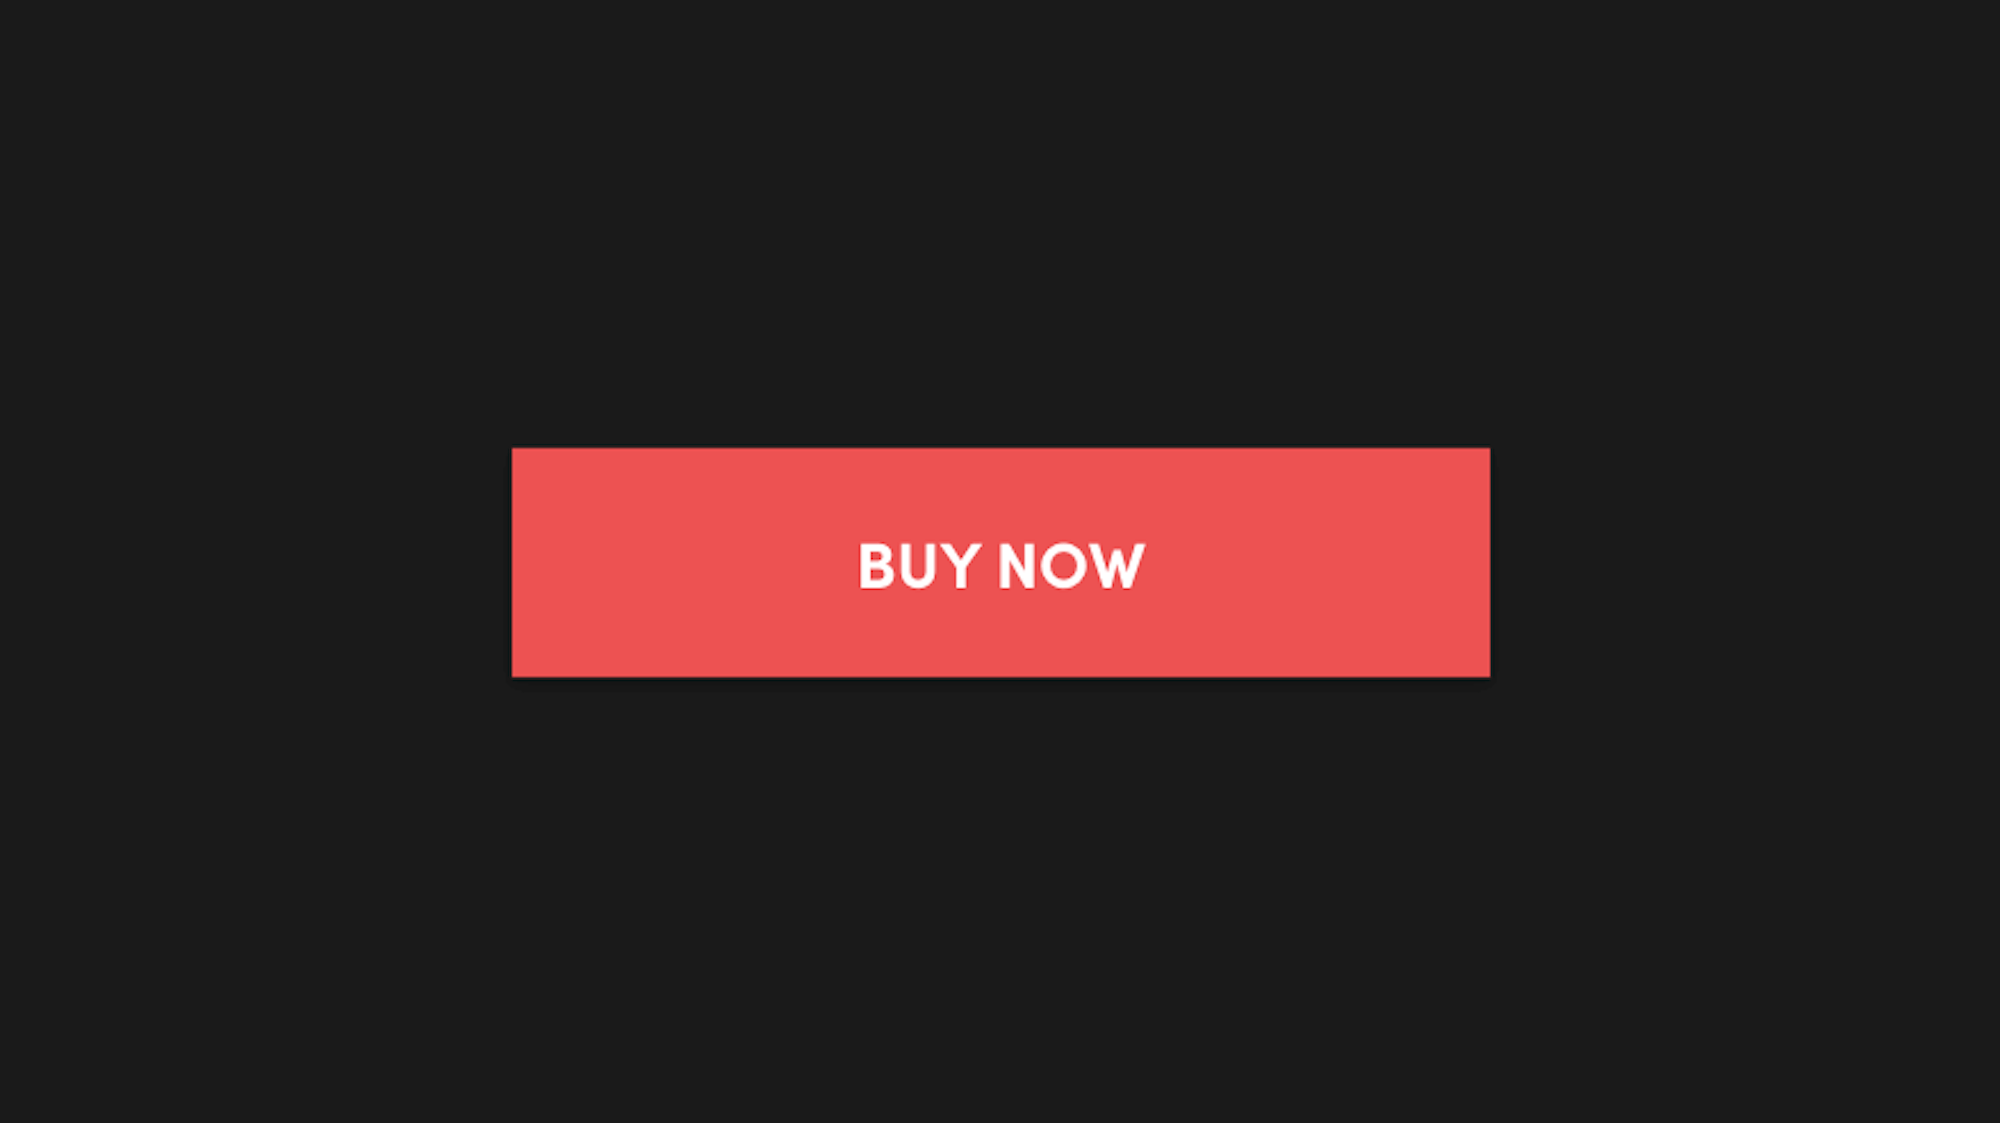 Large, red CTA button on black background with text "buy now"